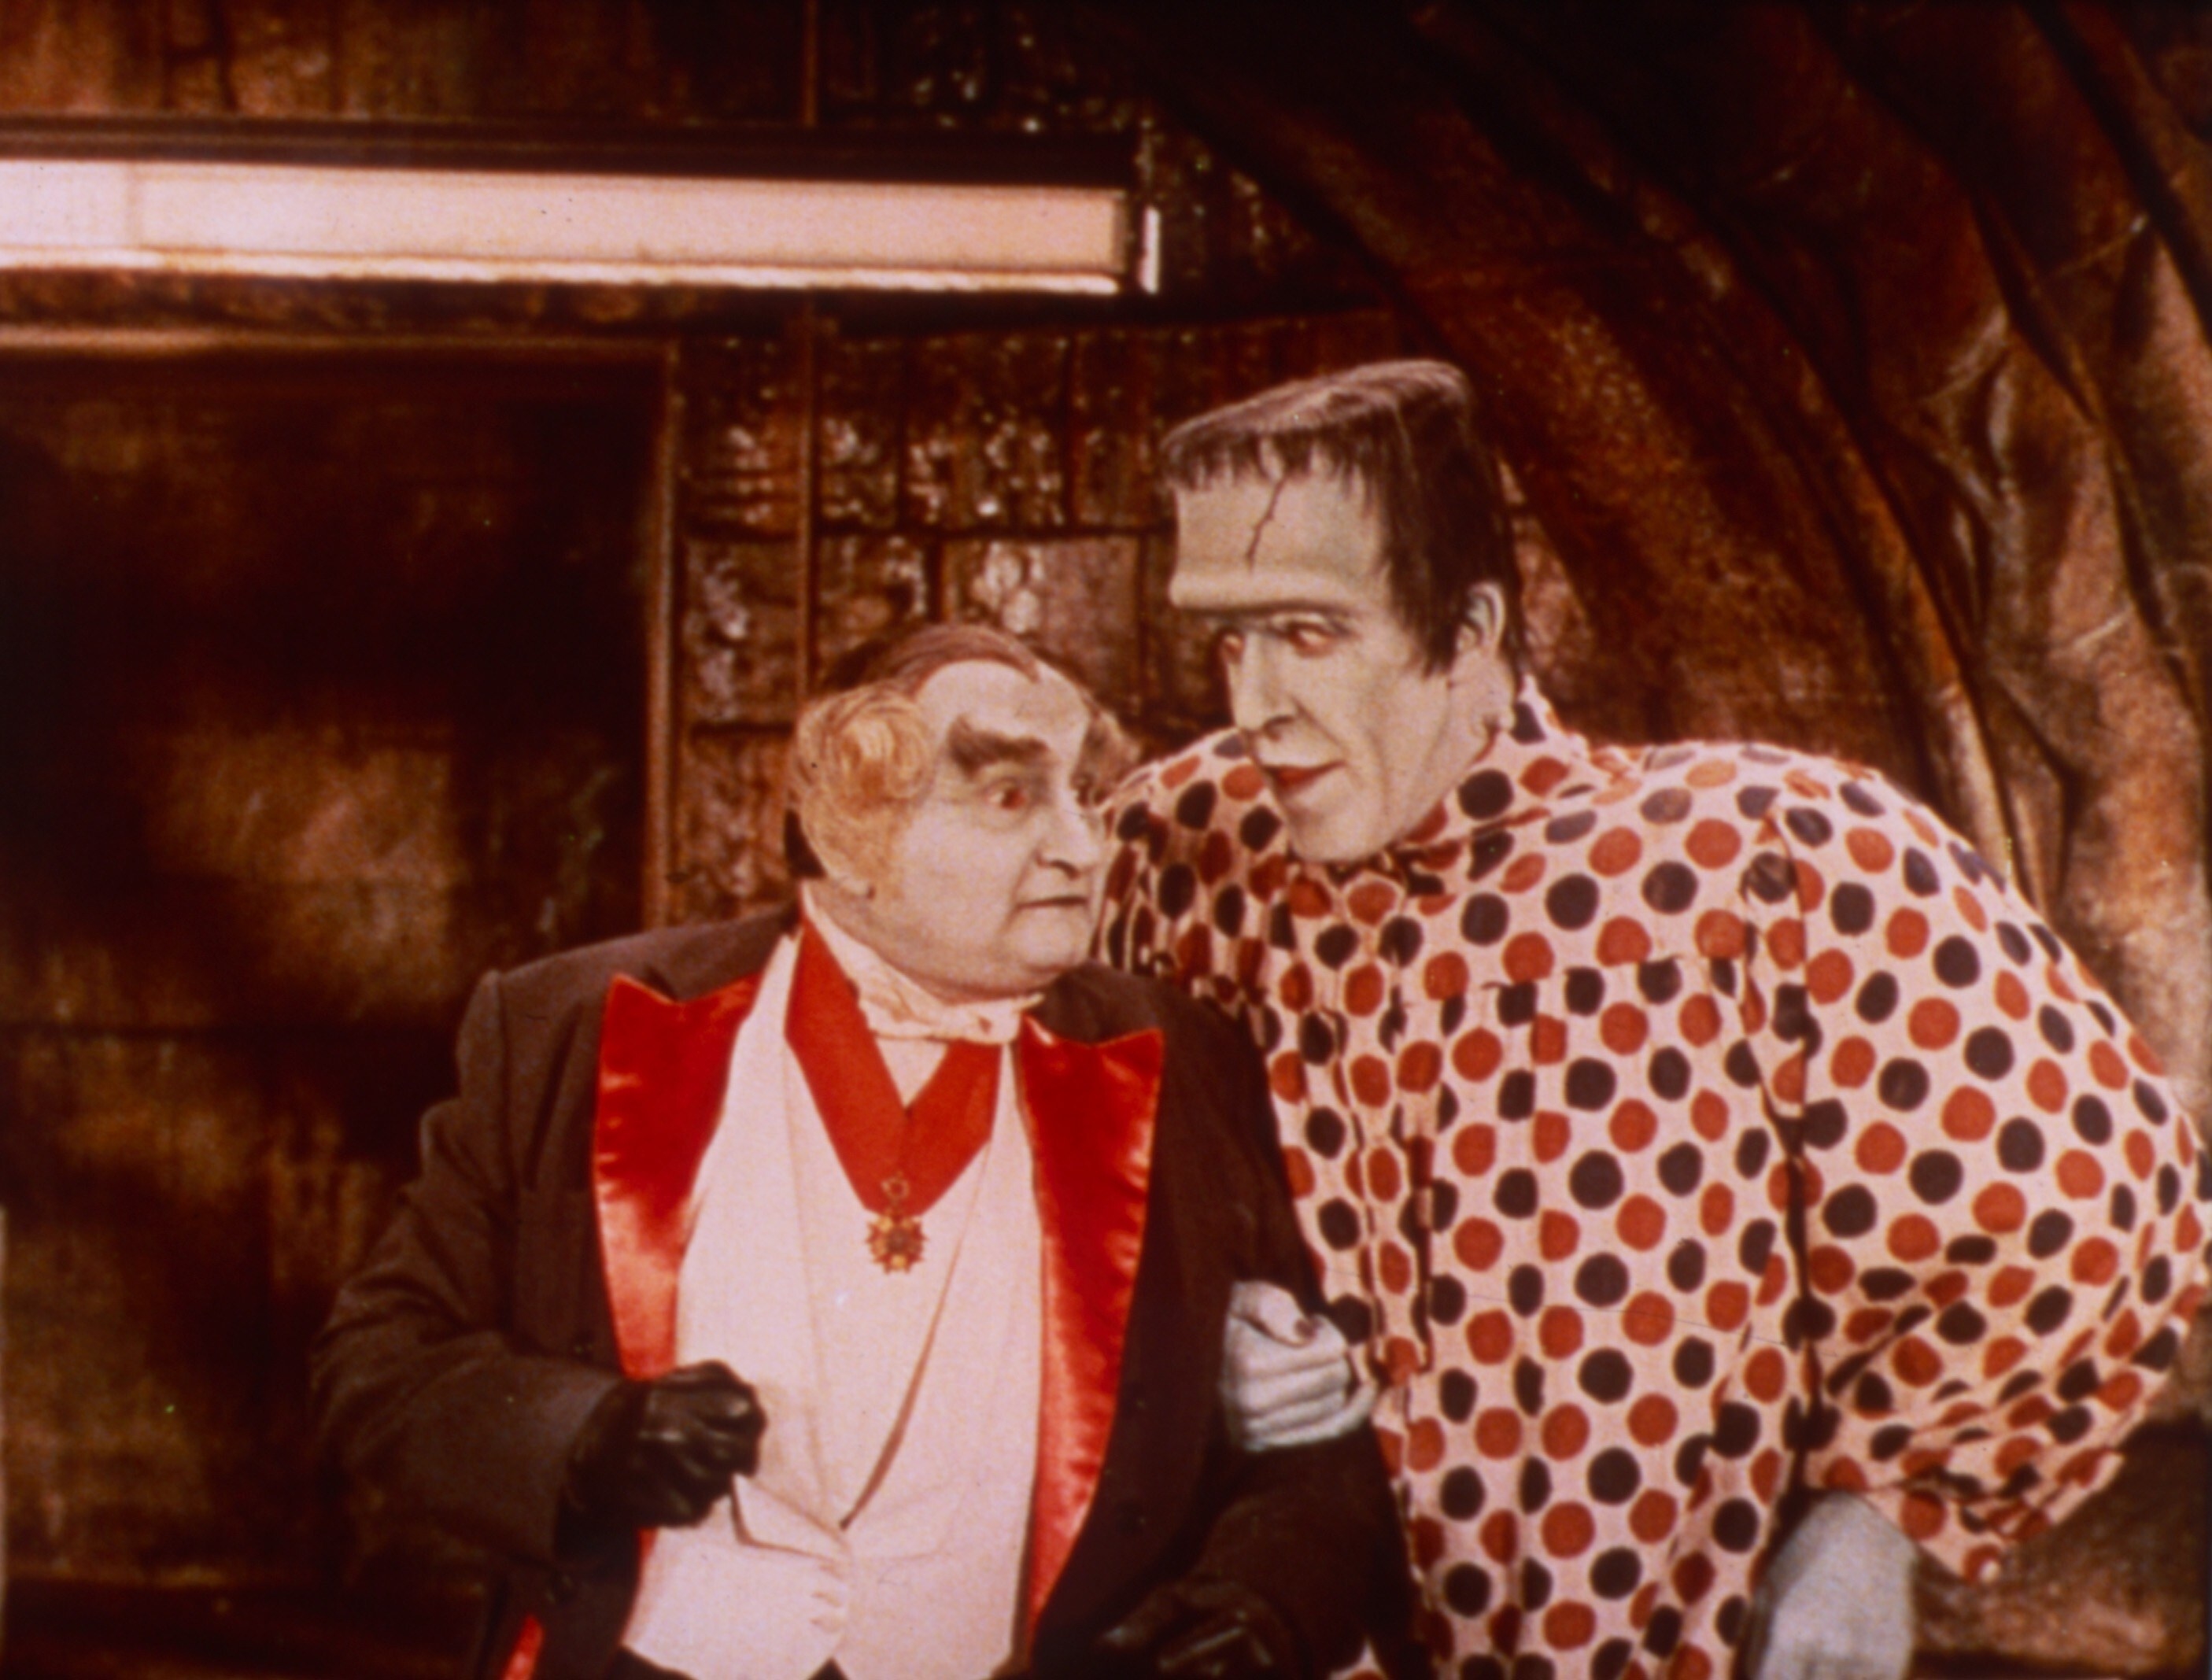 Al Lewis and Fred Gwynne stand next to each other dressed up as a vampire and Frankenstein